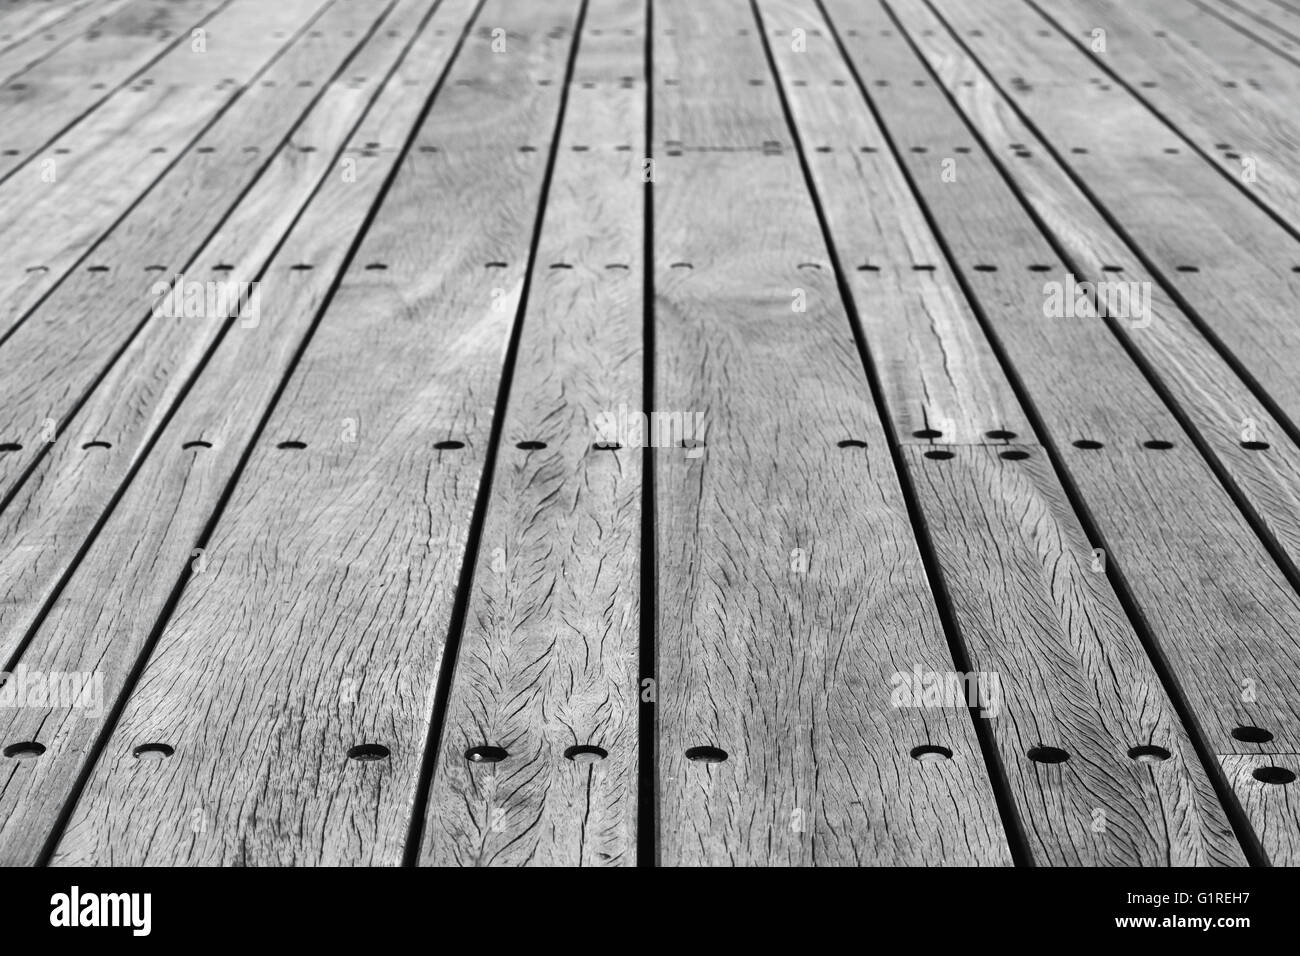 Gray wooden floor made of boards with bolts, background photo with perspective effect and selective focus Stock Photo